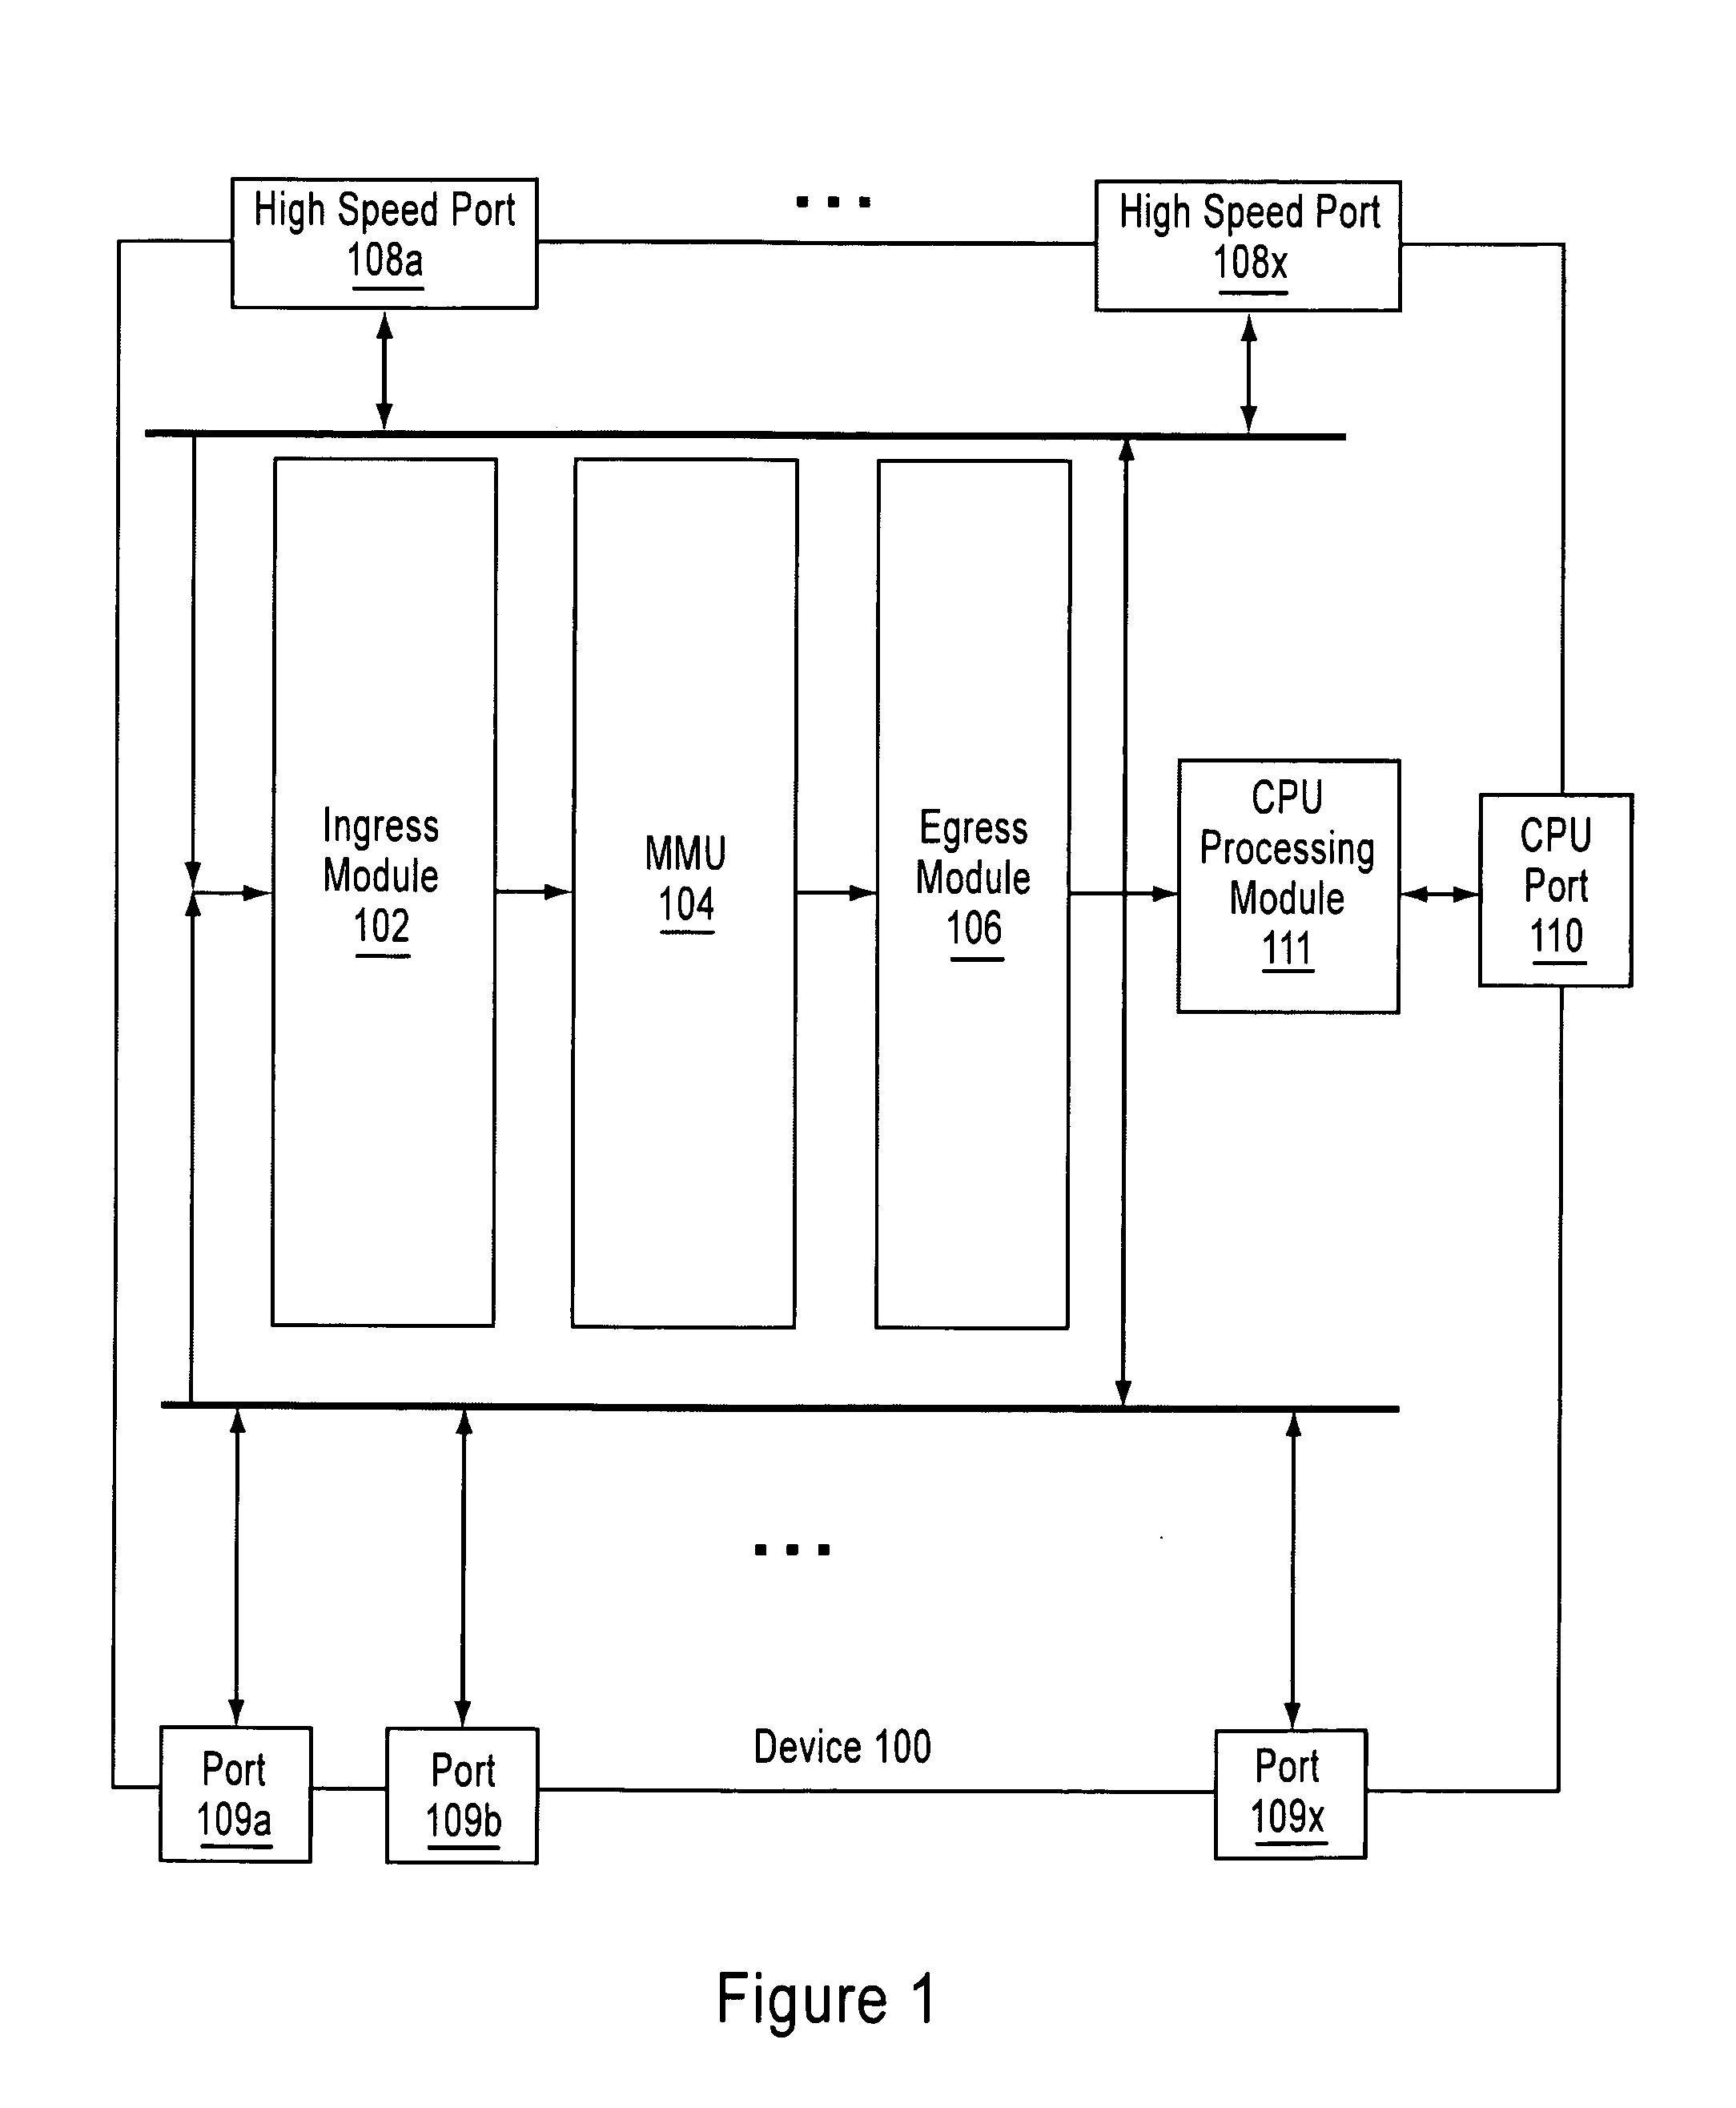 Method and apparatus for dynamically configuring hardware resources by a generic CPU management interface